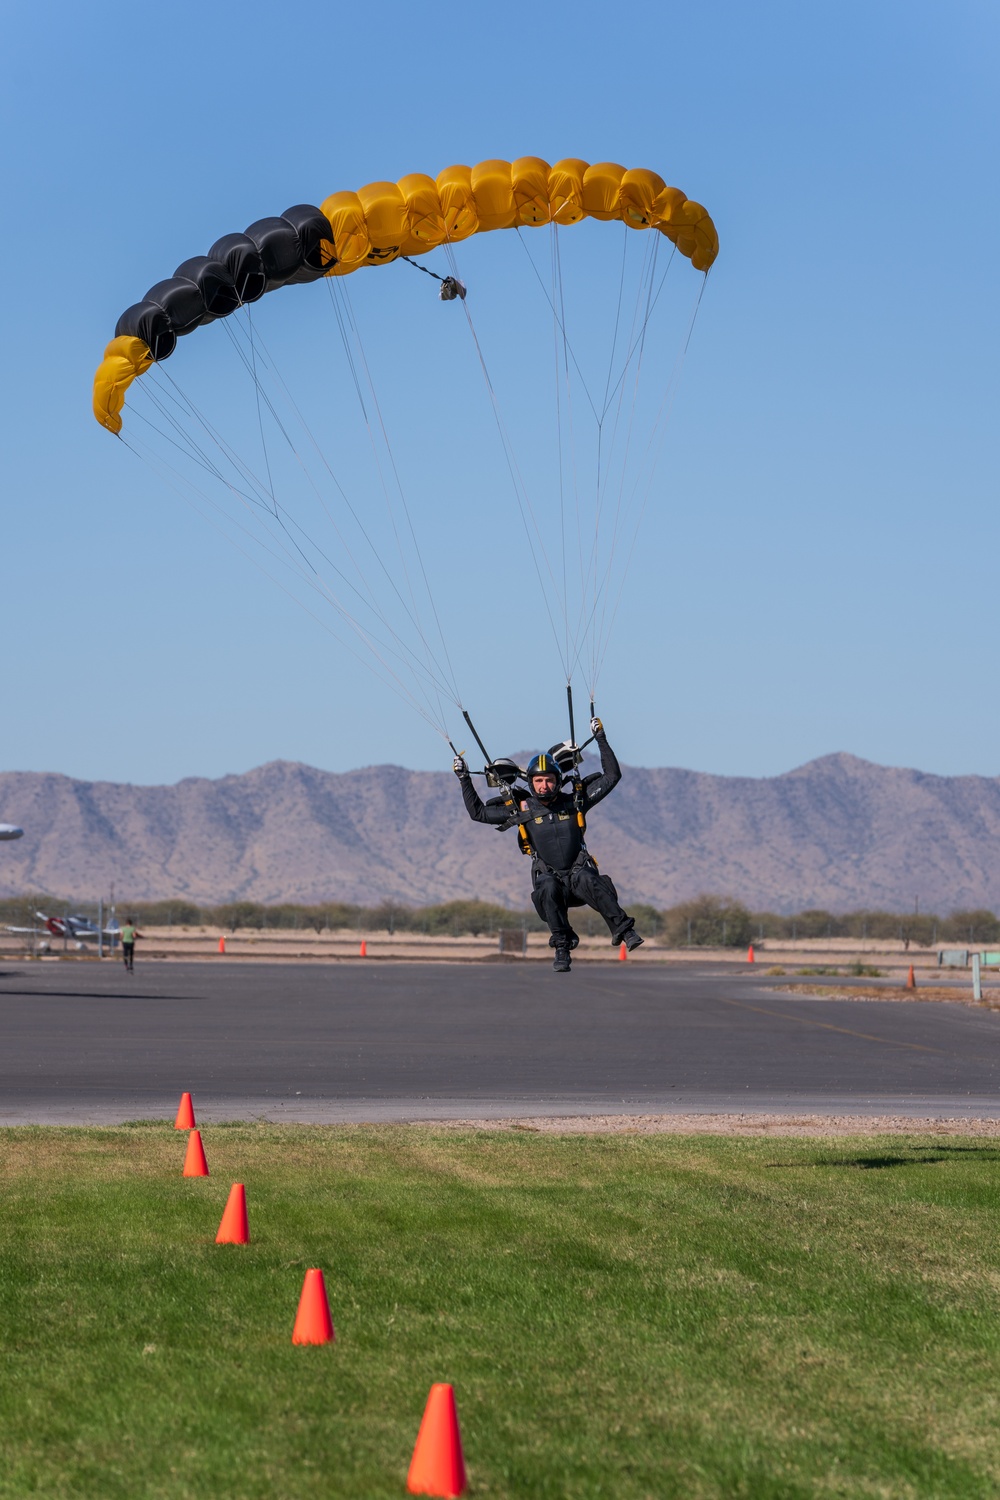 U.S. Army Parachute Team competes in National Skydiving Championship events